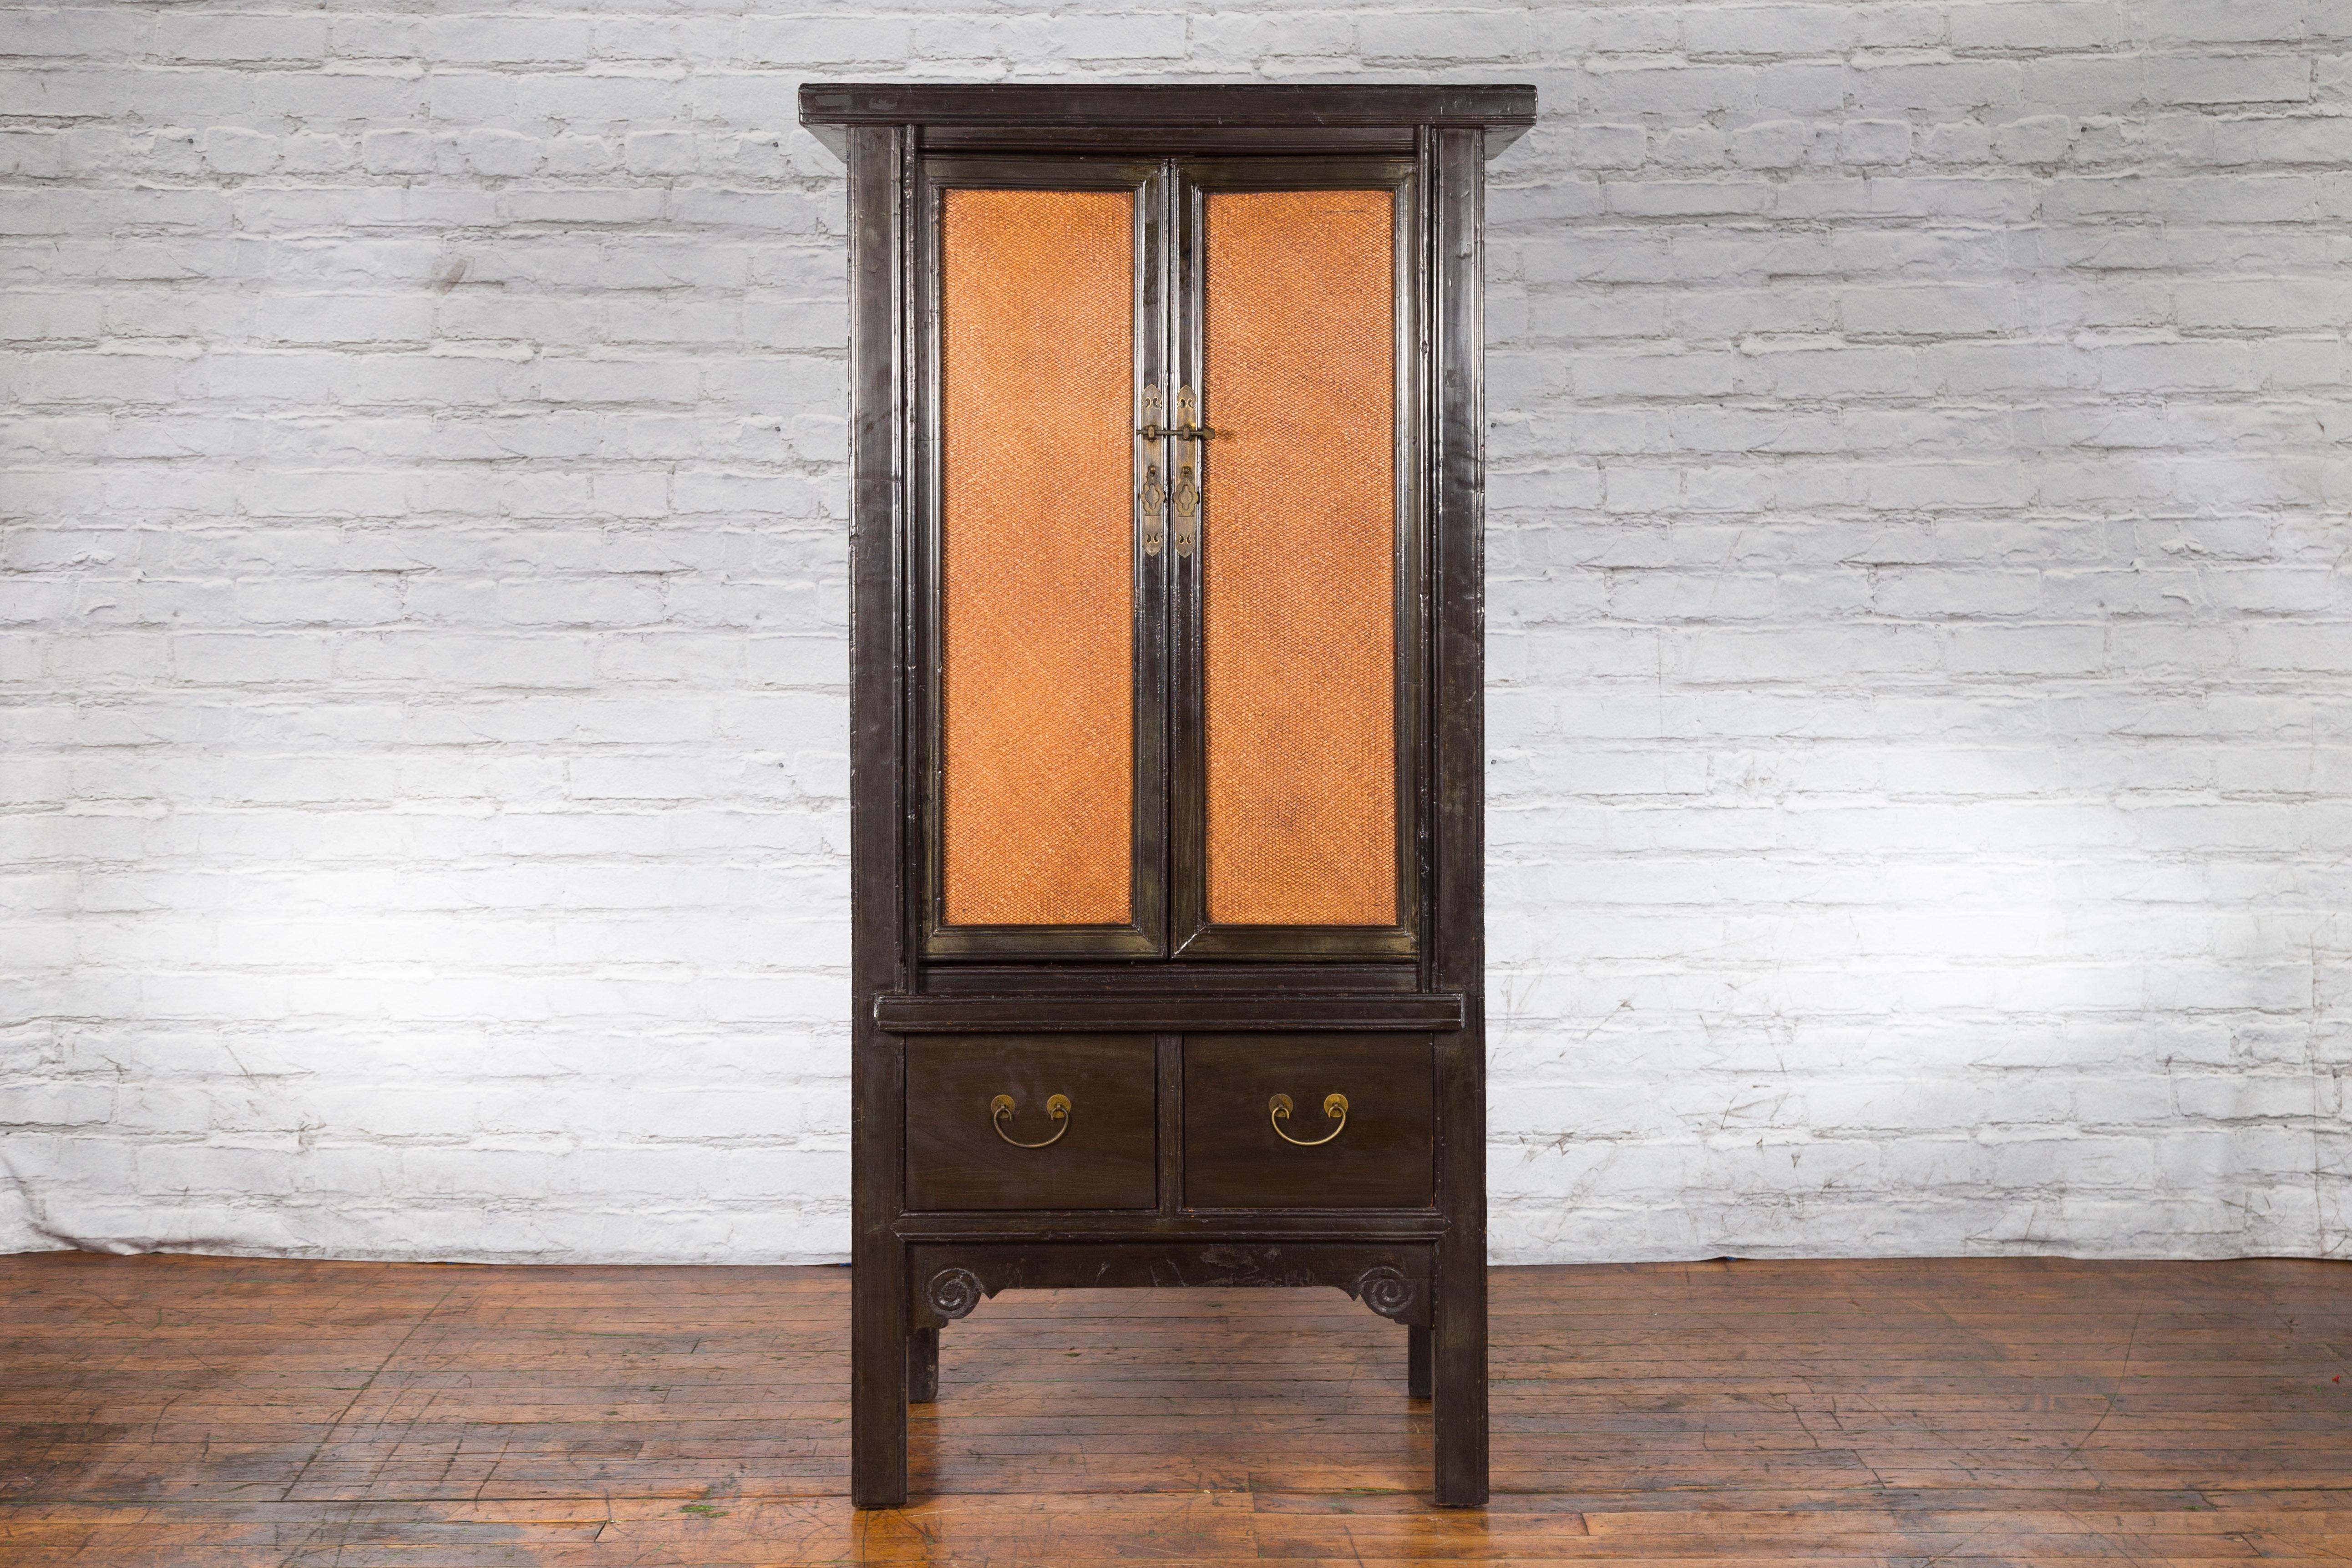 Woven Chinese Early 20th Century Dark Lacquer Cabinet with Rattan Doors and Drawers